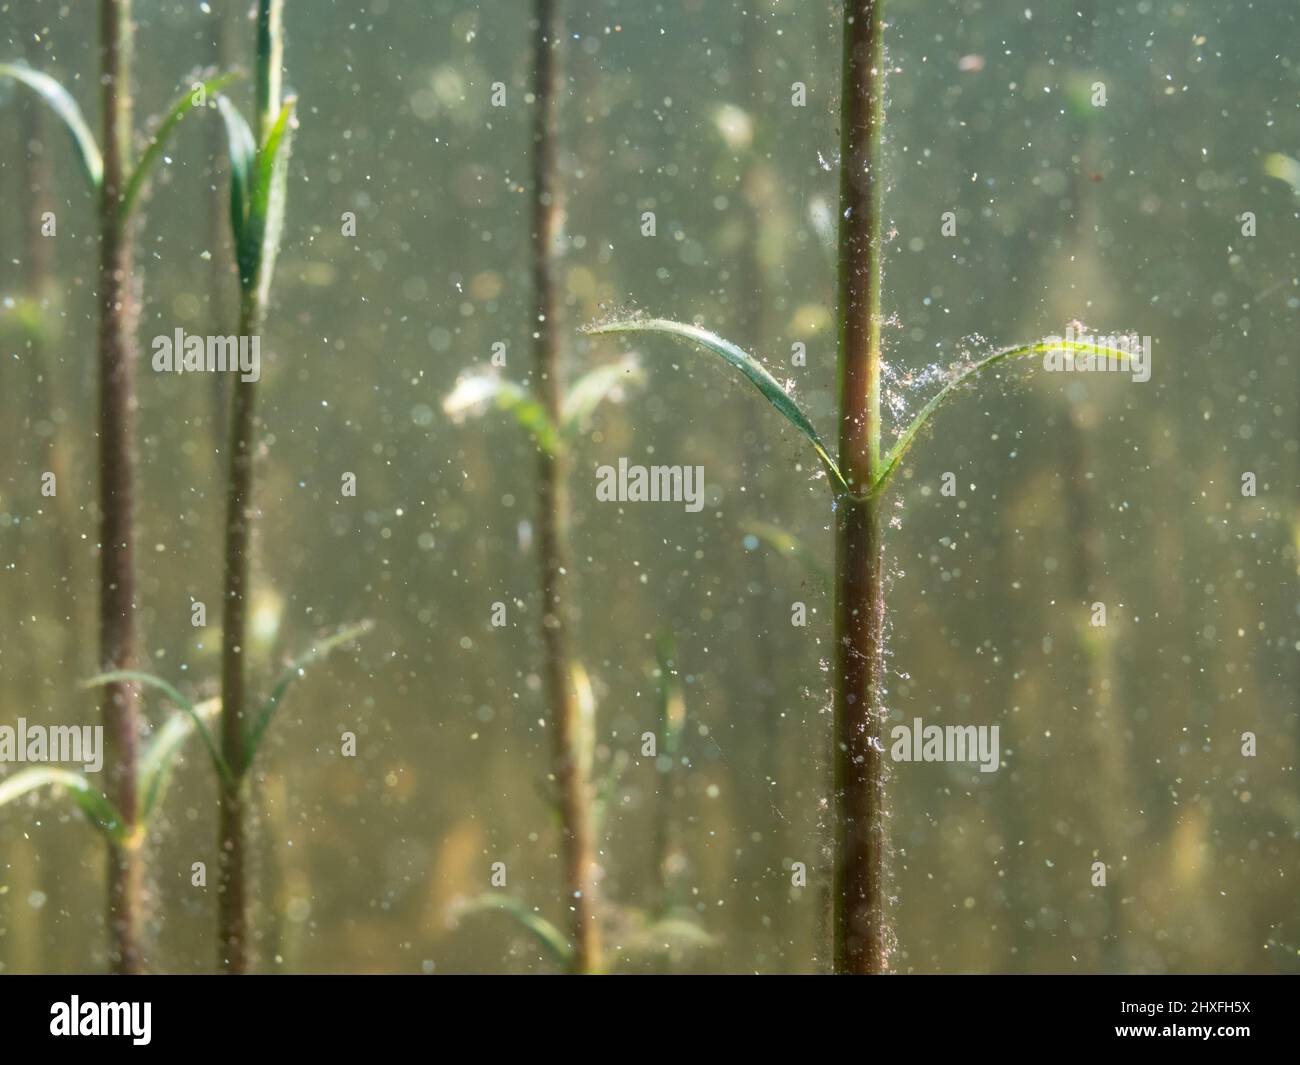 Underwater stems and leaves of tufted loosestrife aquatic plant Stock Photo